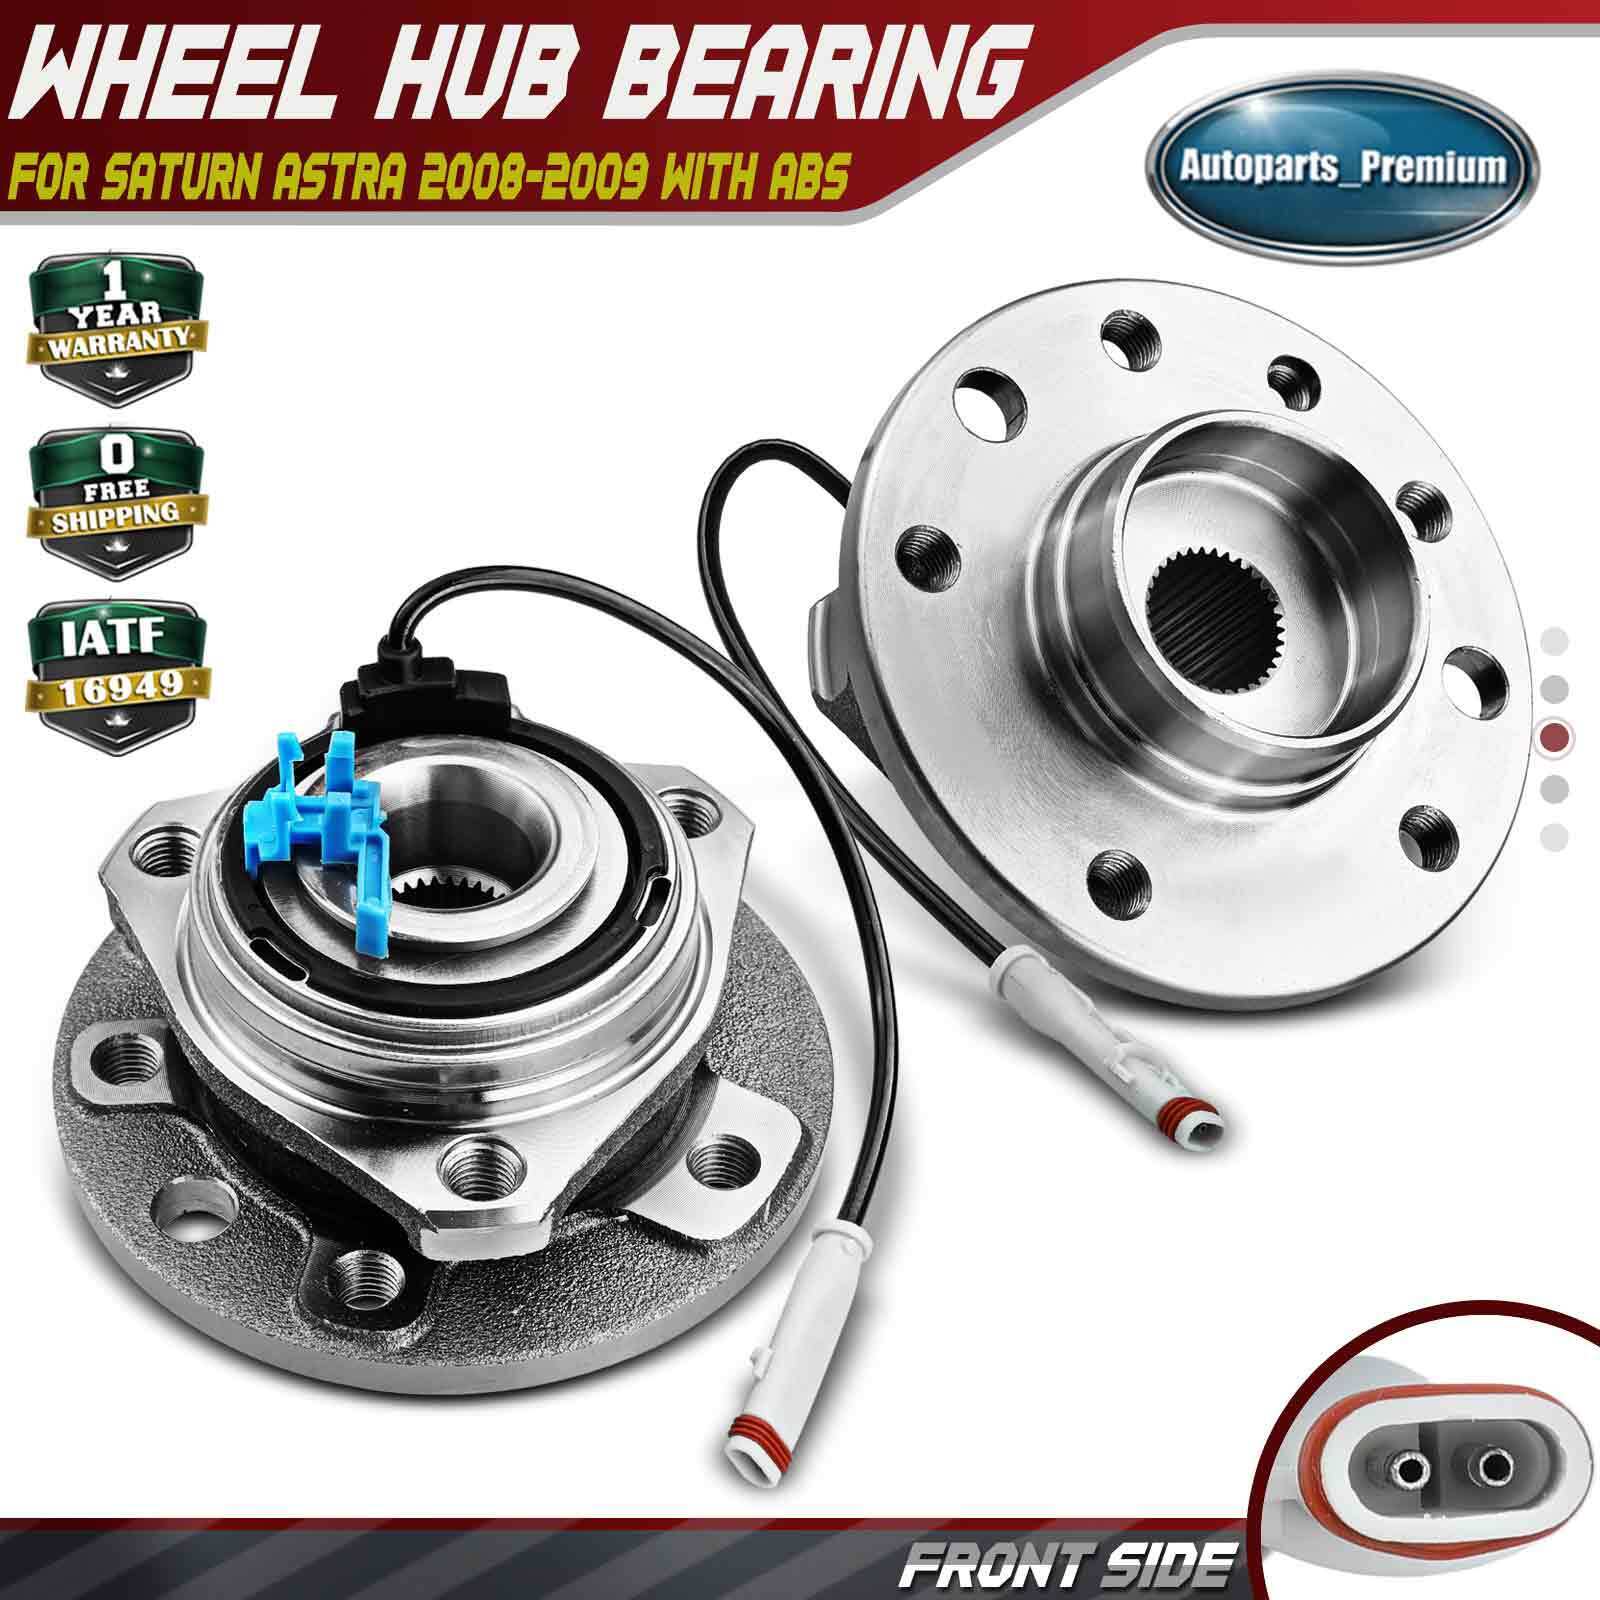 2Pcs Front LH & RH Wheel Hub Bearing Assembly for Saturn Astra 08-09 1.8L w/ ABS